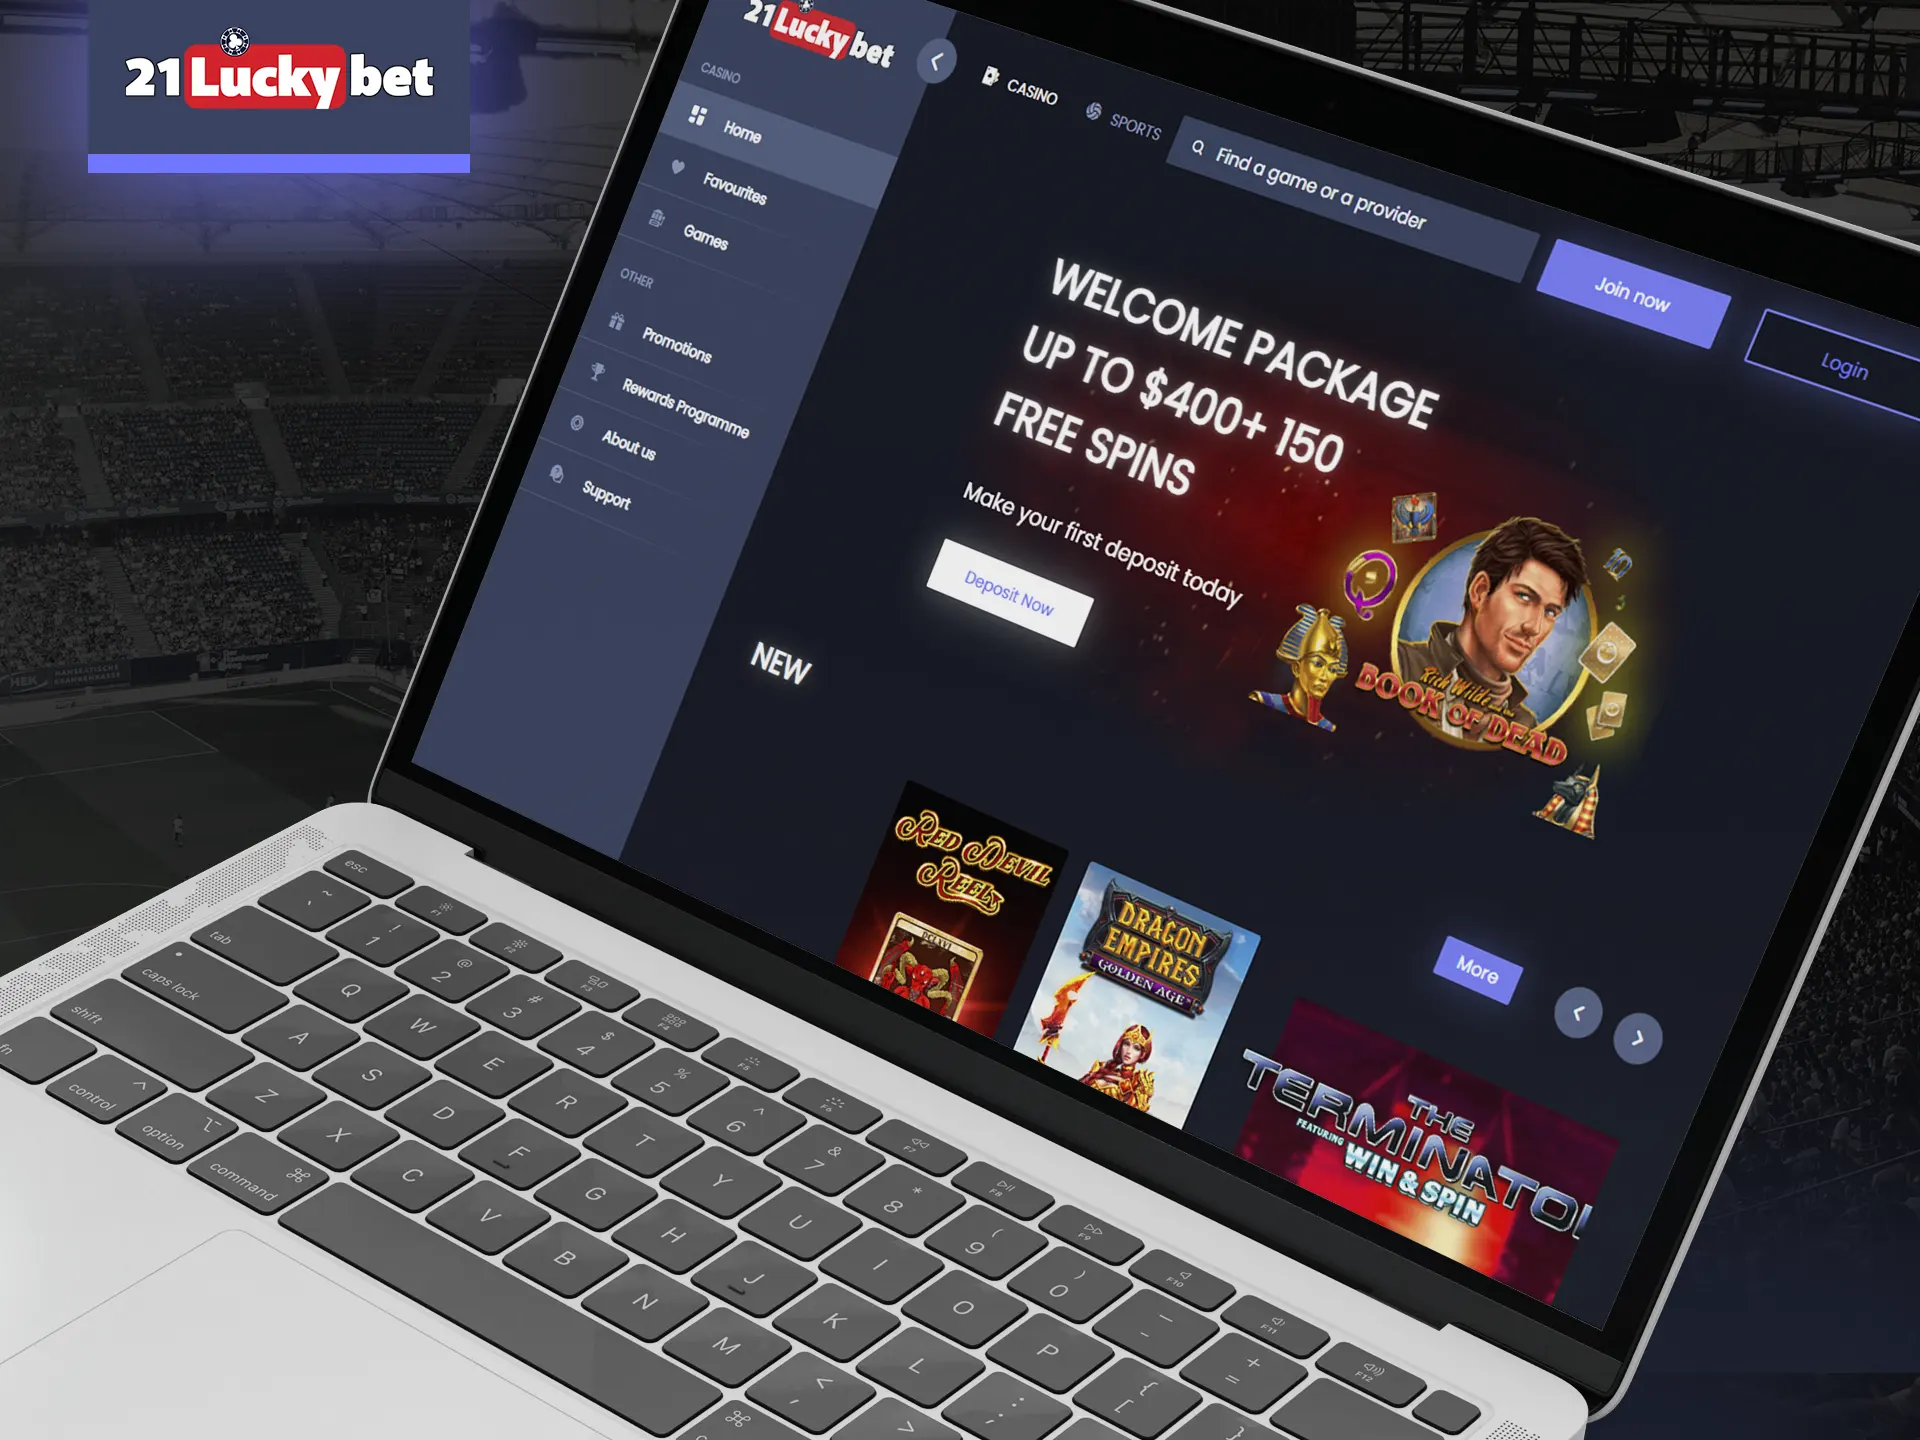 Visit the official website of 21luckybet.